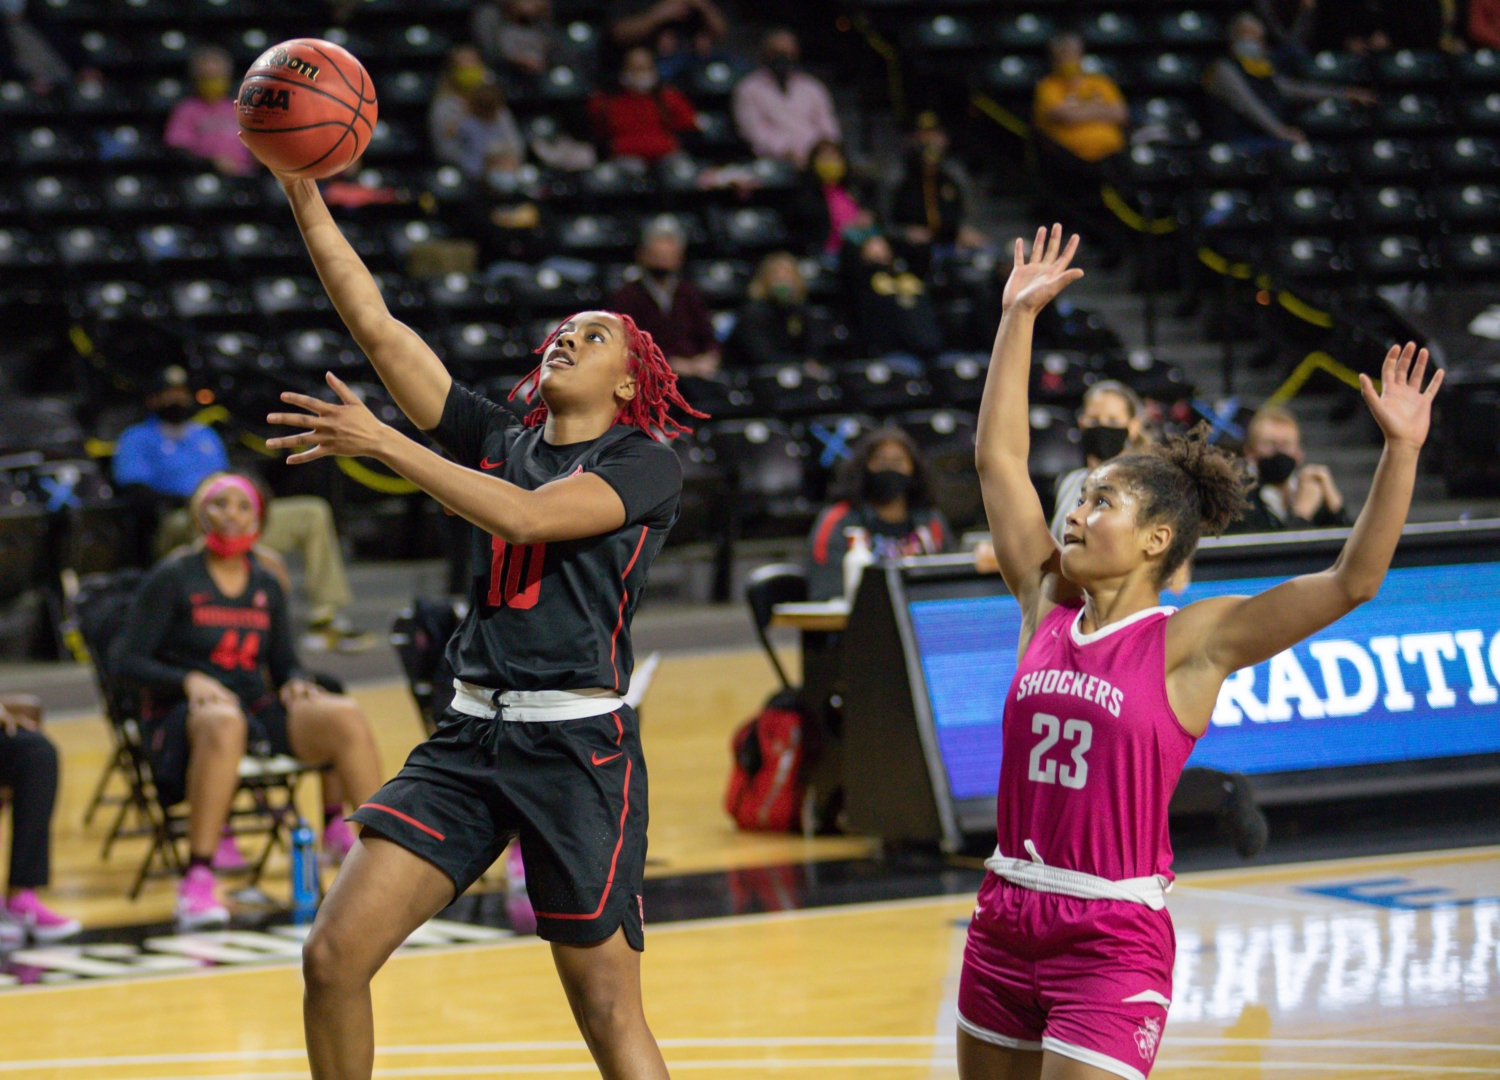 UH women's basketball guard Britney Onyeje ended with 13 points in the team's win against Wichita State on Wednesday. | Sean Marty/The Sunflower